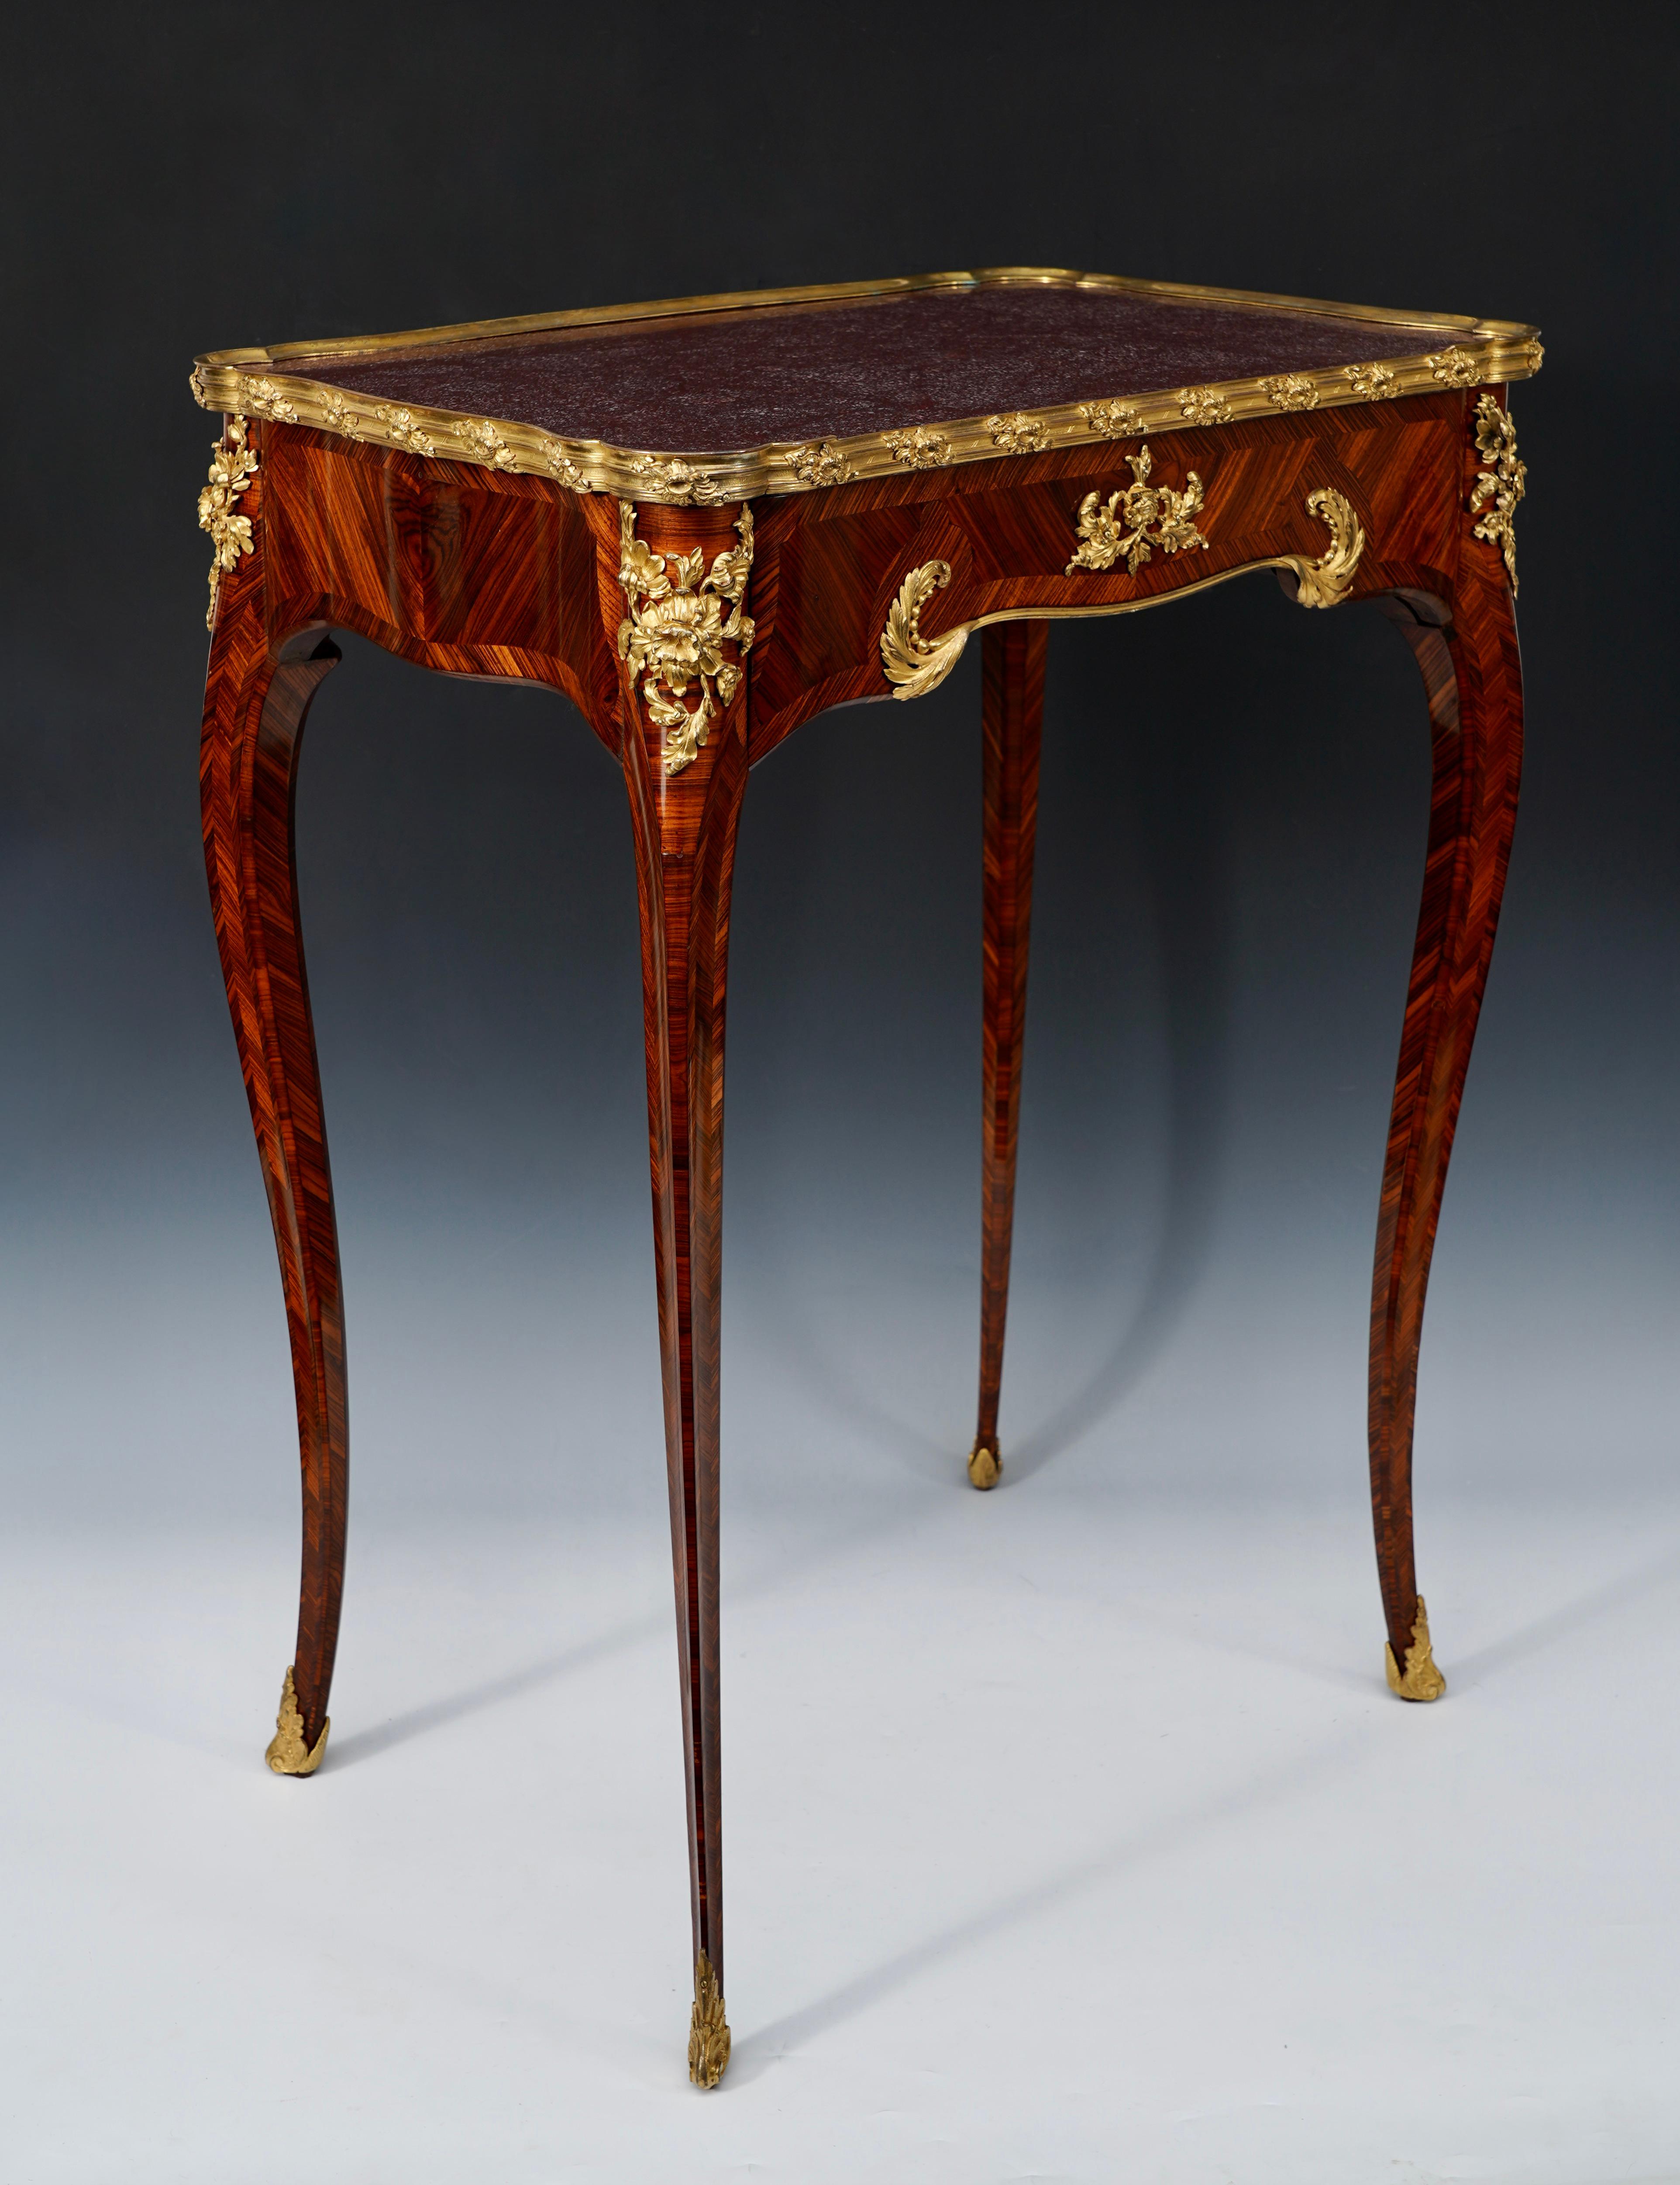 Stamped H. Nelson

Charming Louis XV-inspired scalloped-shaped writing table in kingwood veneer and decorated with a fine gilded and chiseled bronze mount. The tray, surrounded by a gilded bronze mold, is covered with an Egyptian porphyry top. It